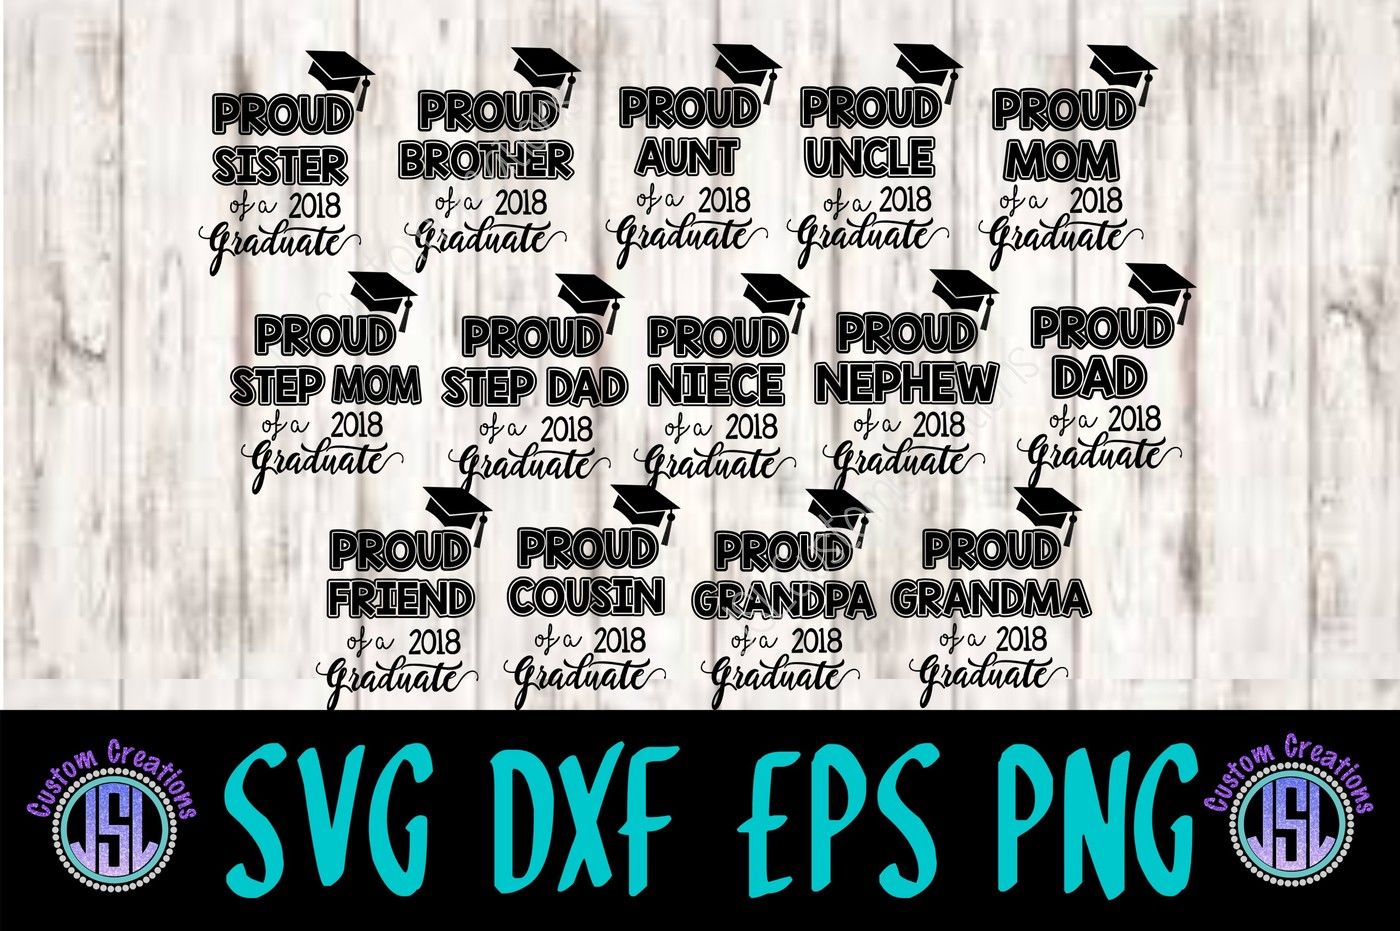 Proud Family Of A 2018 Graduate Set Of 14 Bundle Svg Dxf Eps Png By Jslcustomcreations Thehungryjpeg Com